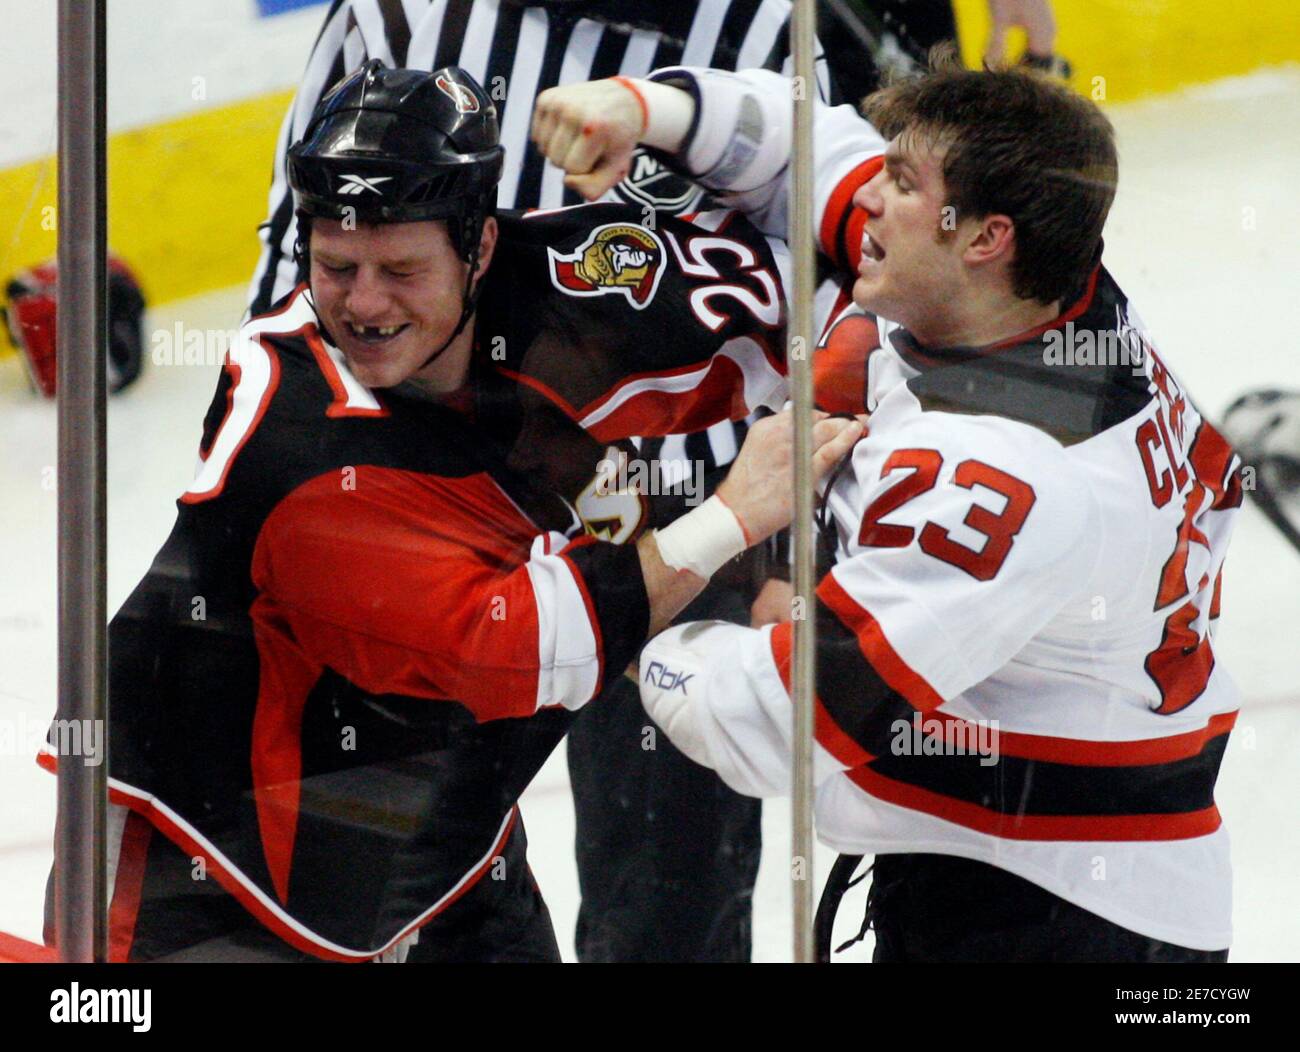 Ottawa Senators' Chris Neil (L) reacts as New Jersey Devils' David Clarkson  swings a fist at his head during the third period of their NHL hockey game  in Ottawa January 27, 2009.